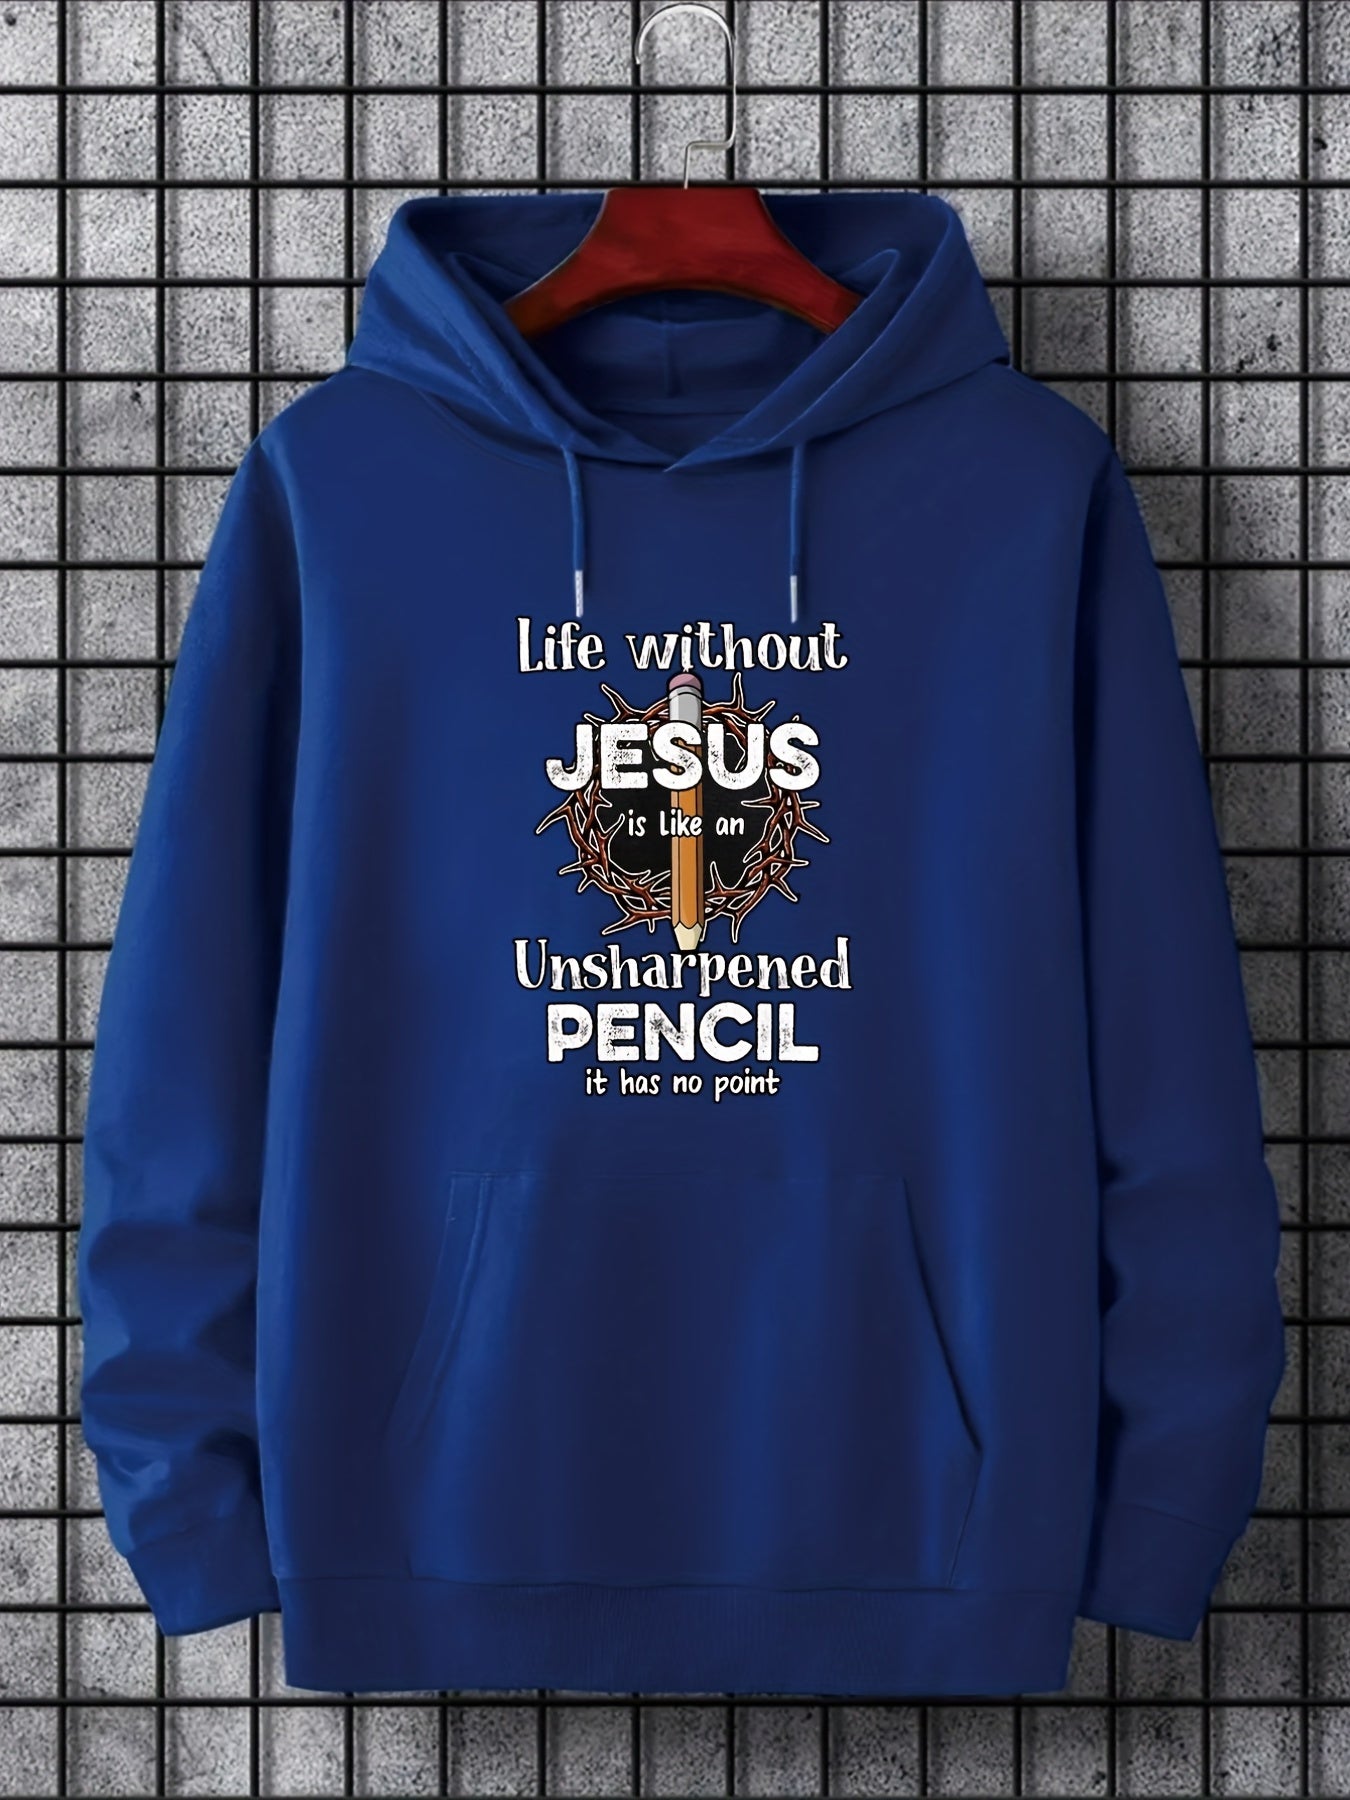 Life Without JESUS Is Like An Unsharpened Pencil: It Has No Point Men's Christian Pullover Hooded Sweatshirt claimedbygoddesigns